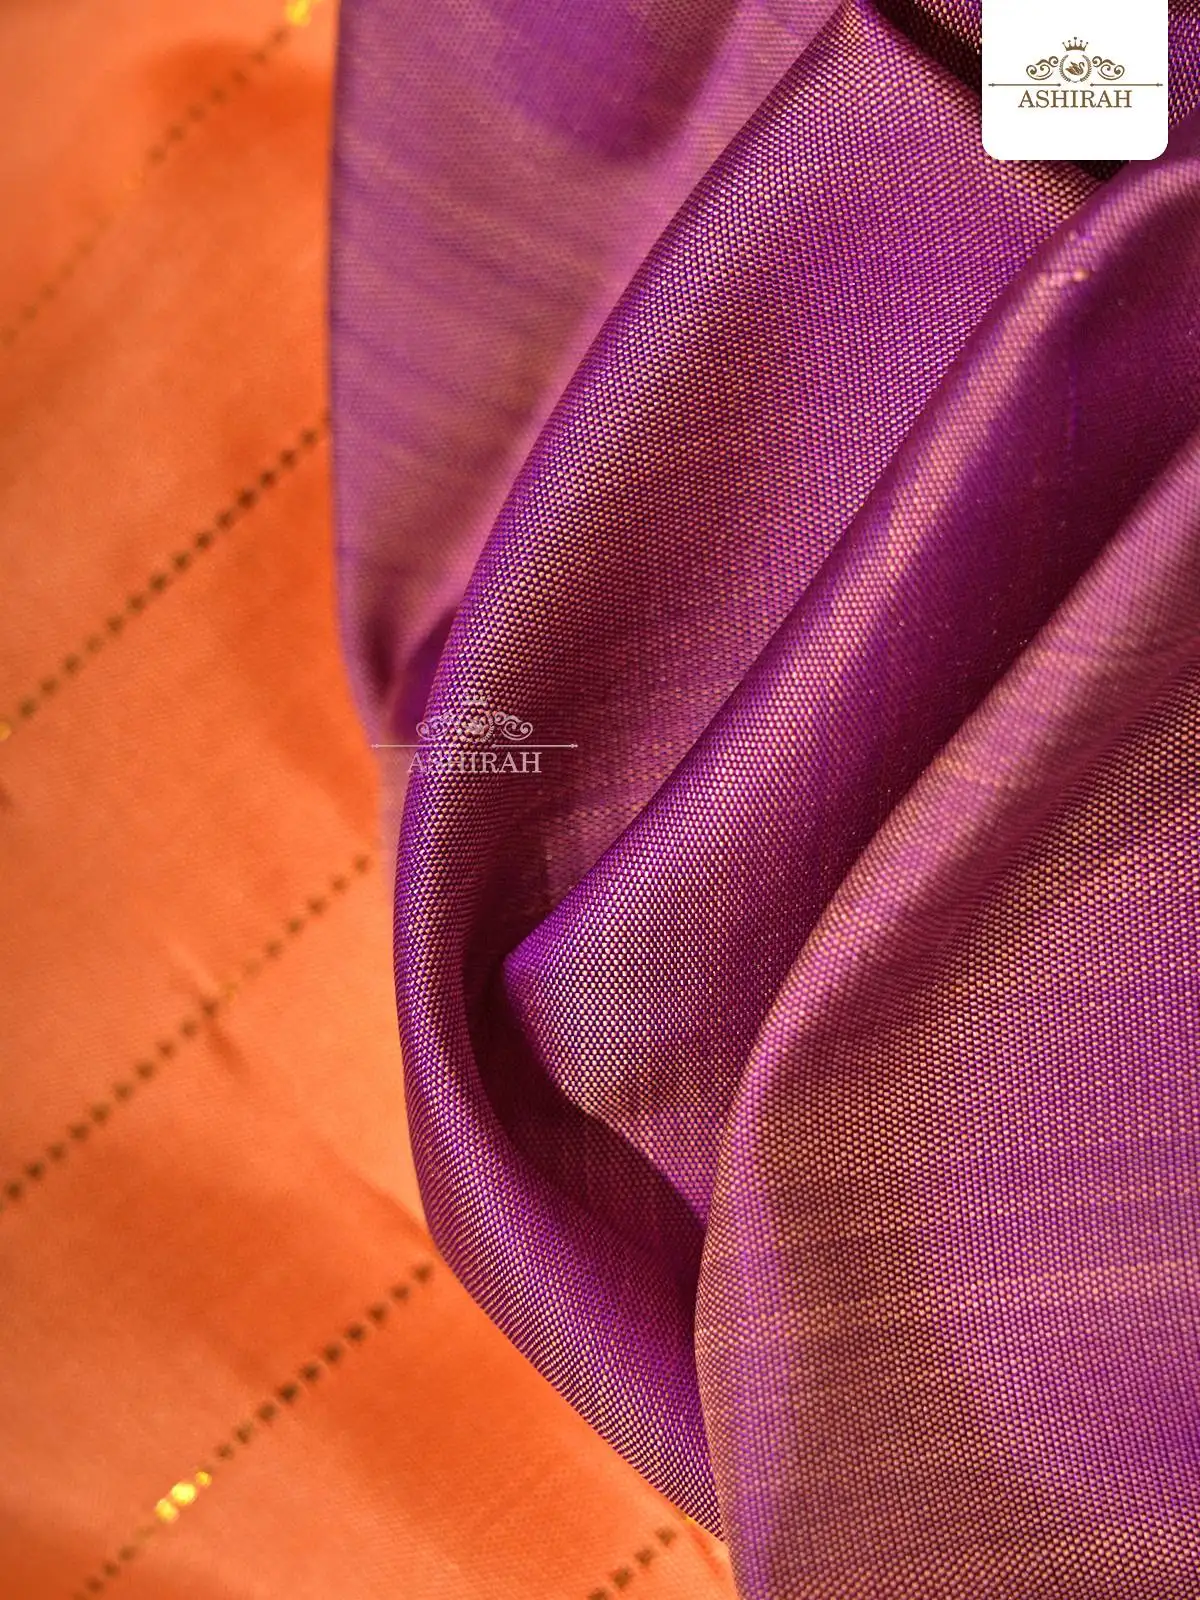 Orange Pure Kanchipuram Silk Saree With Manga Motifs And Horizontal Lines On The Body And Without Border